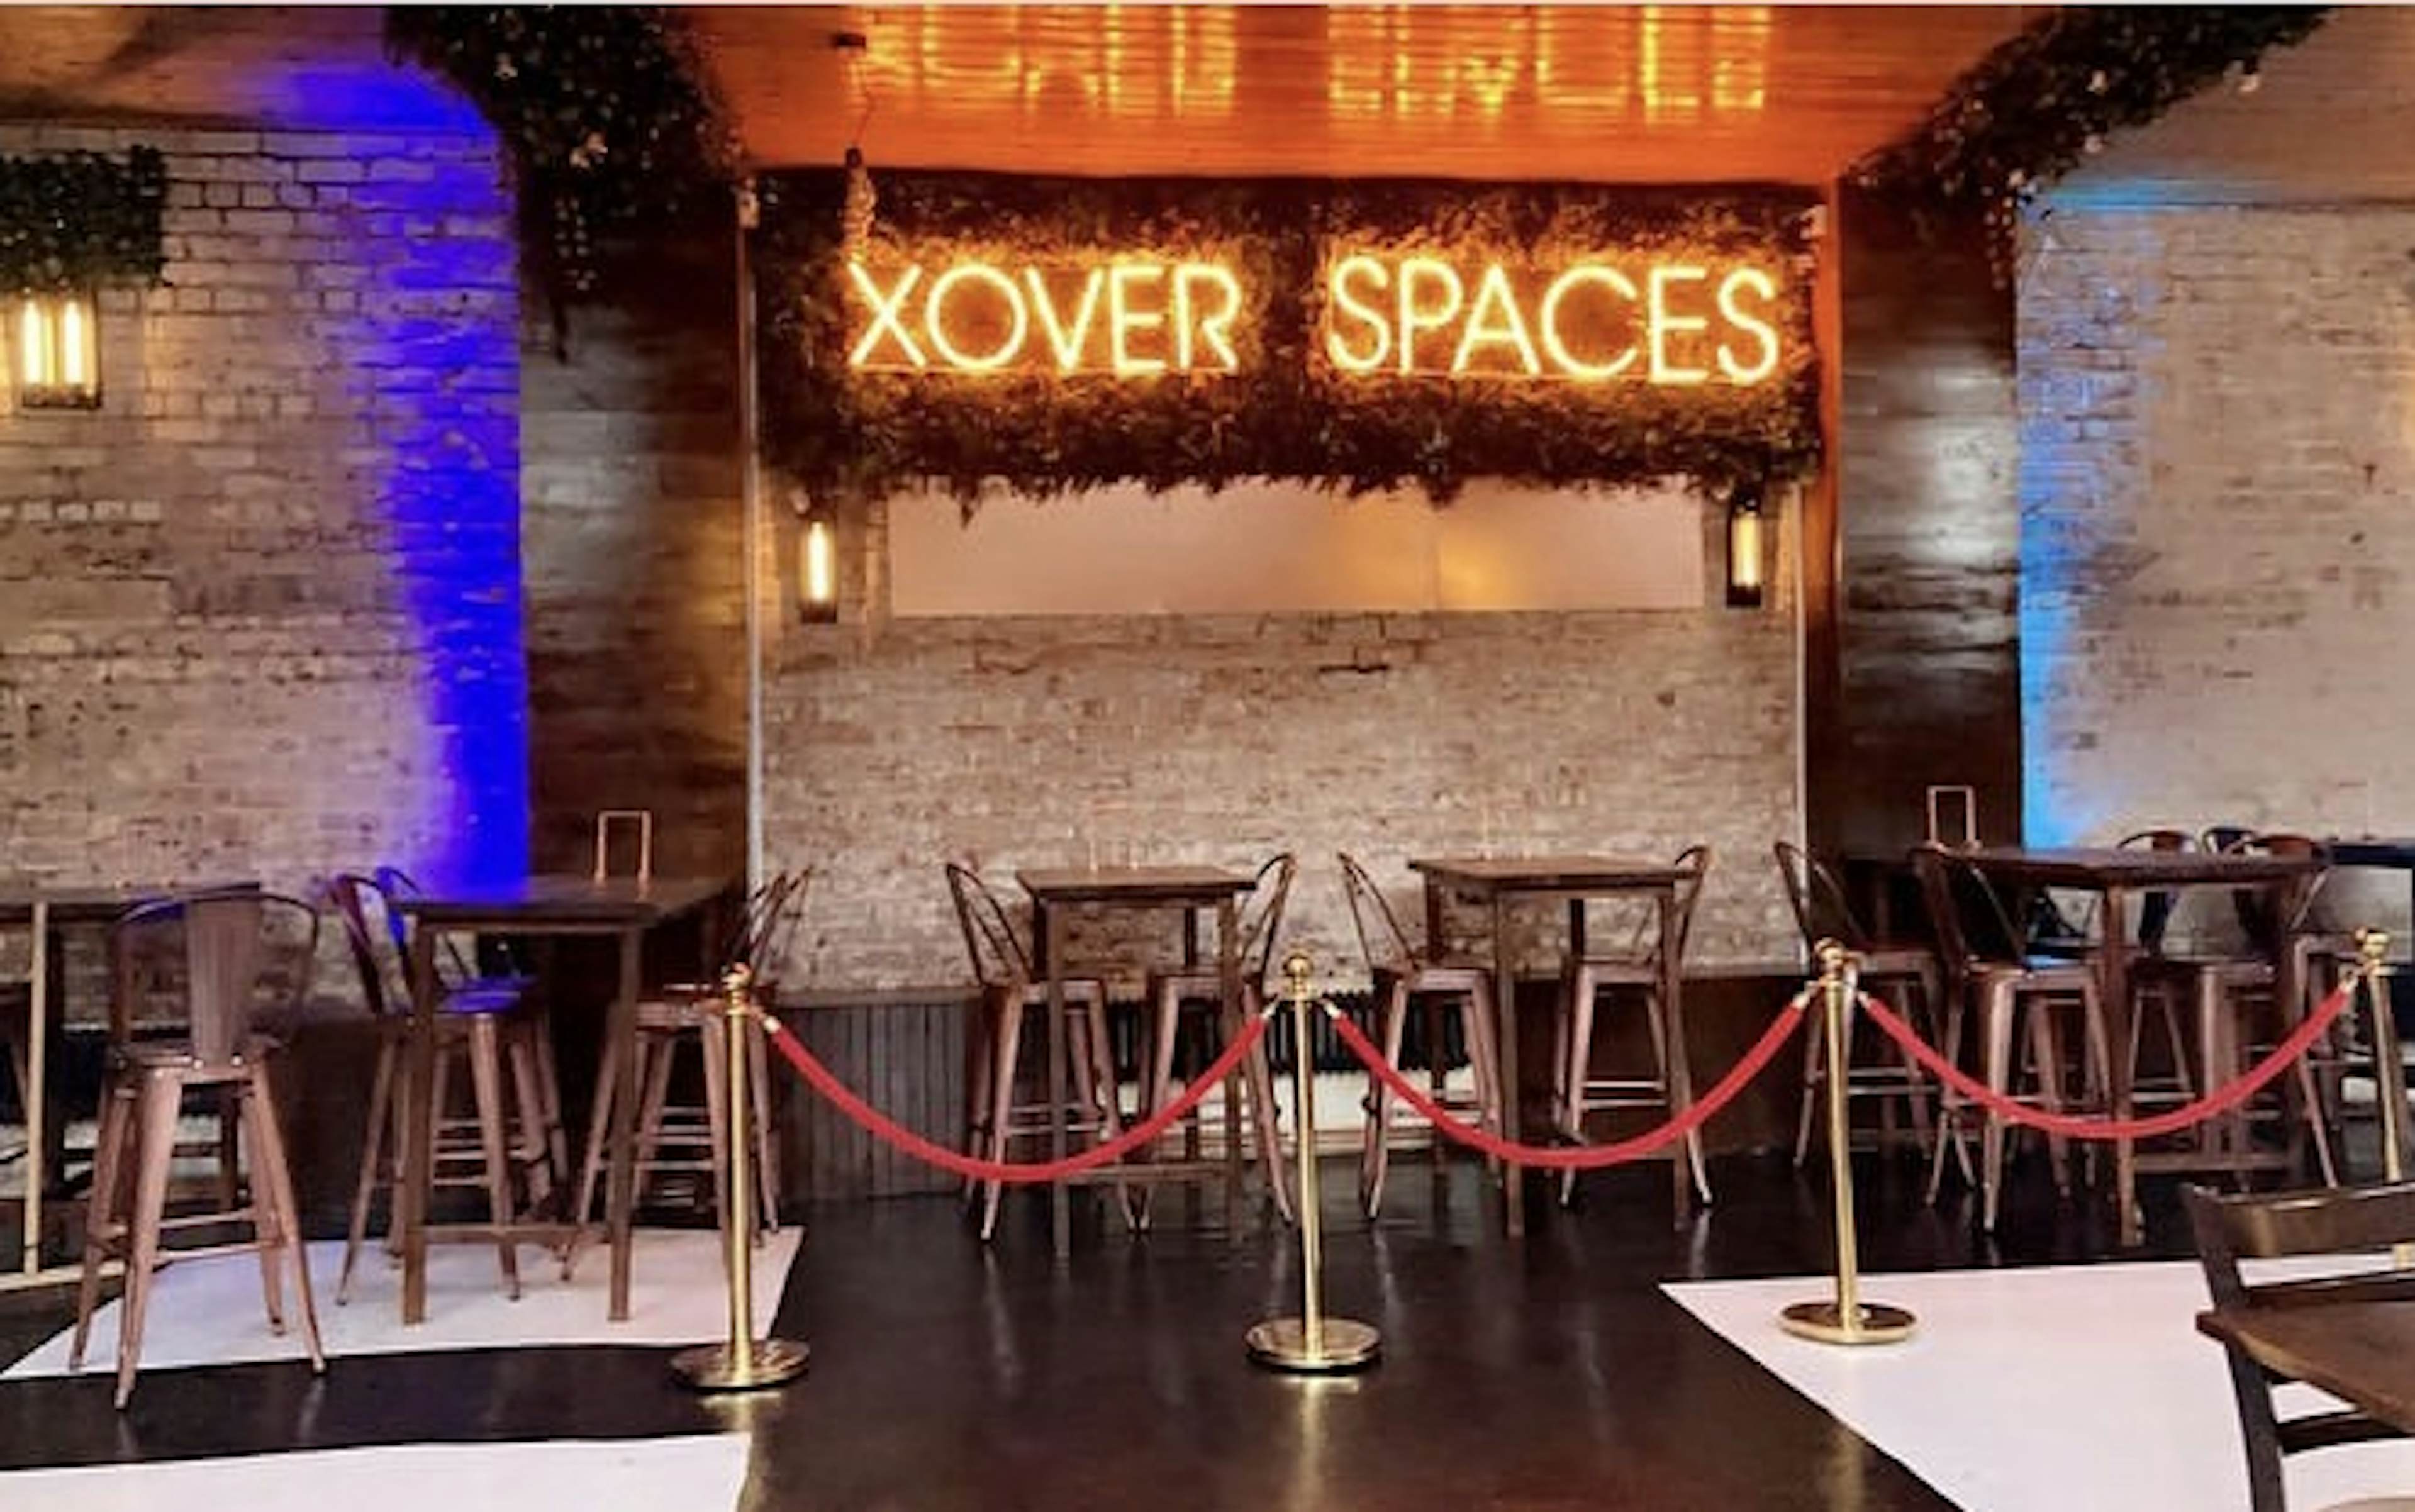 Xover Spaces - Xover Spaces image 1